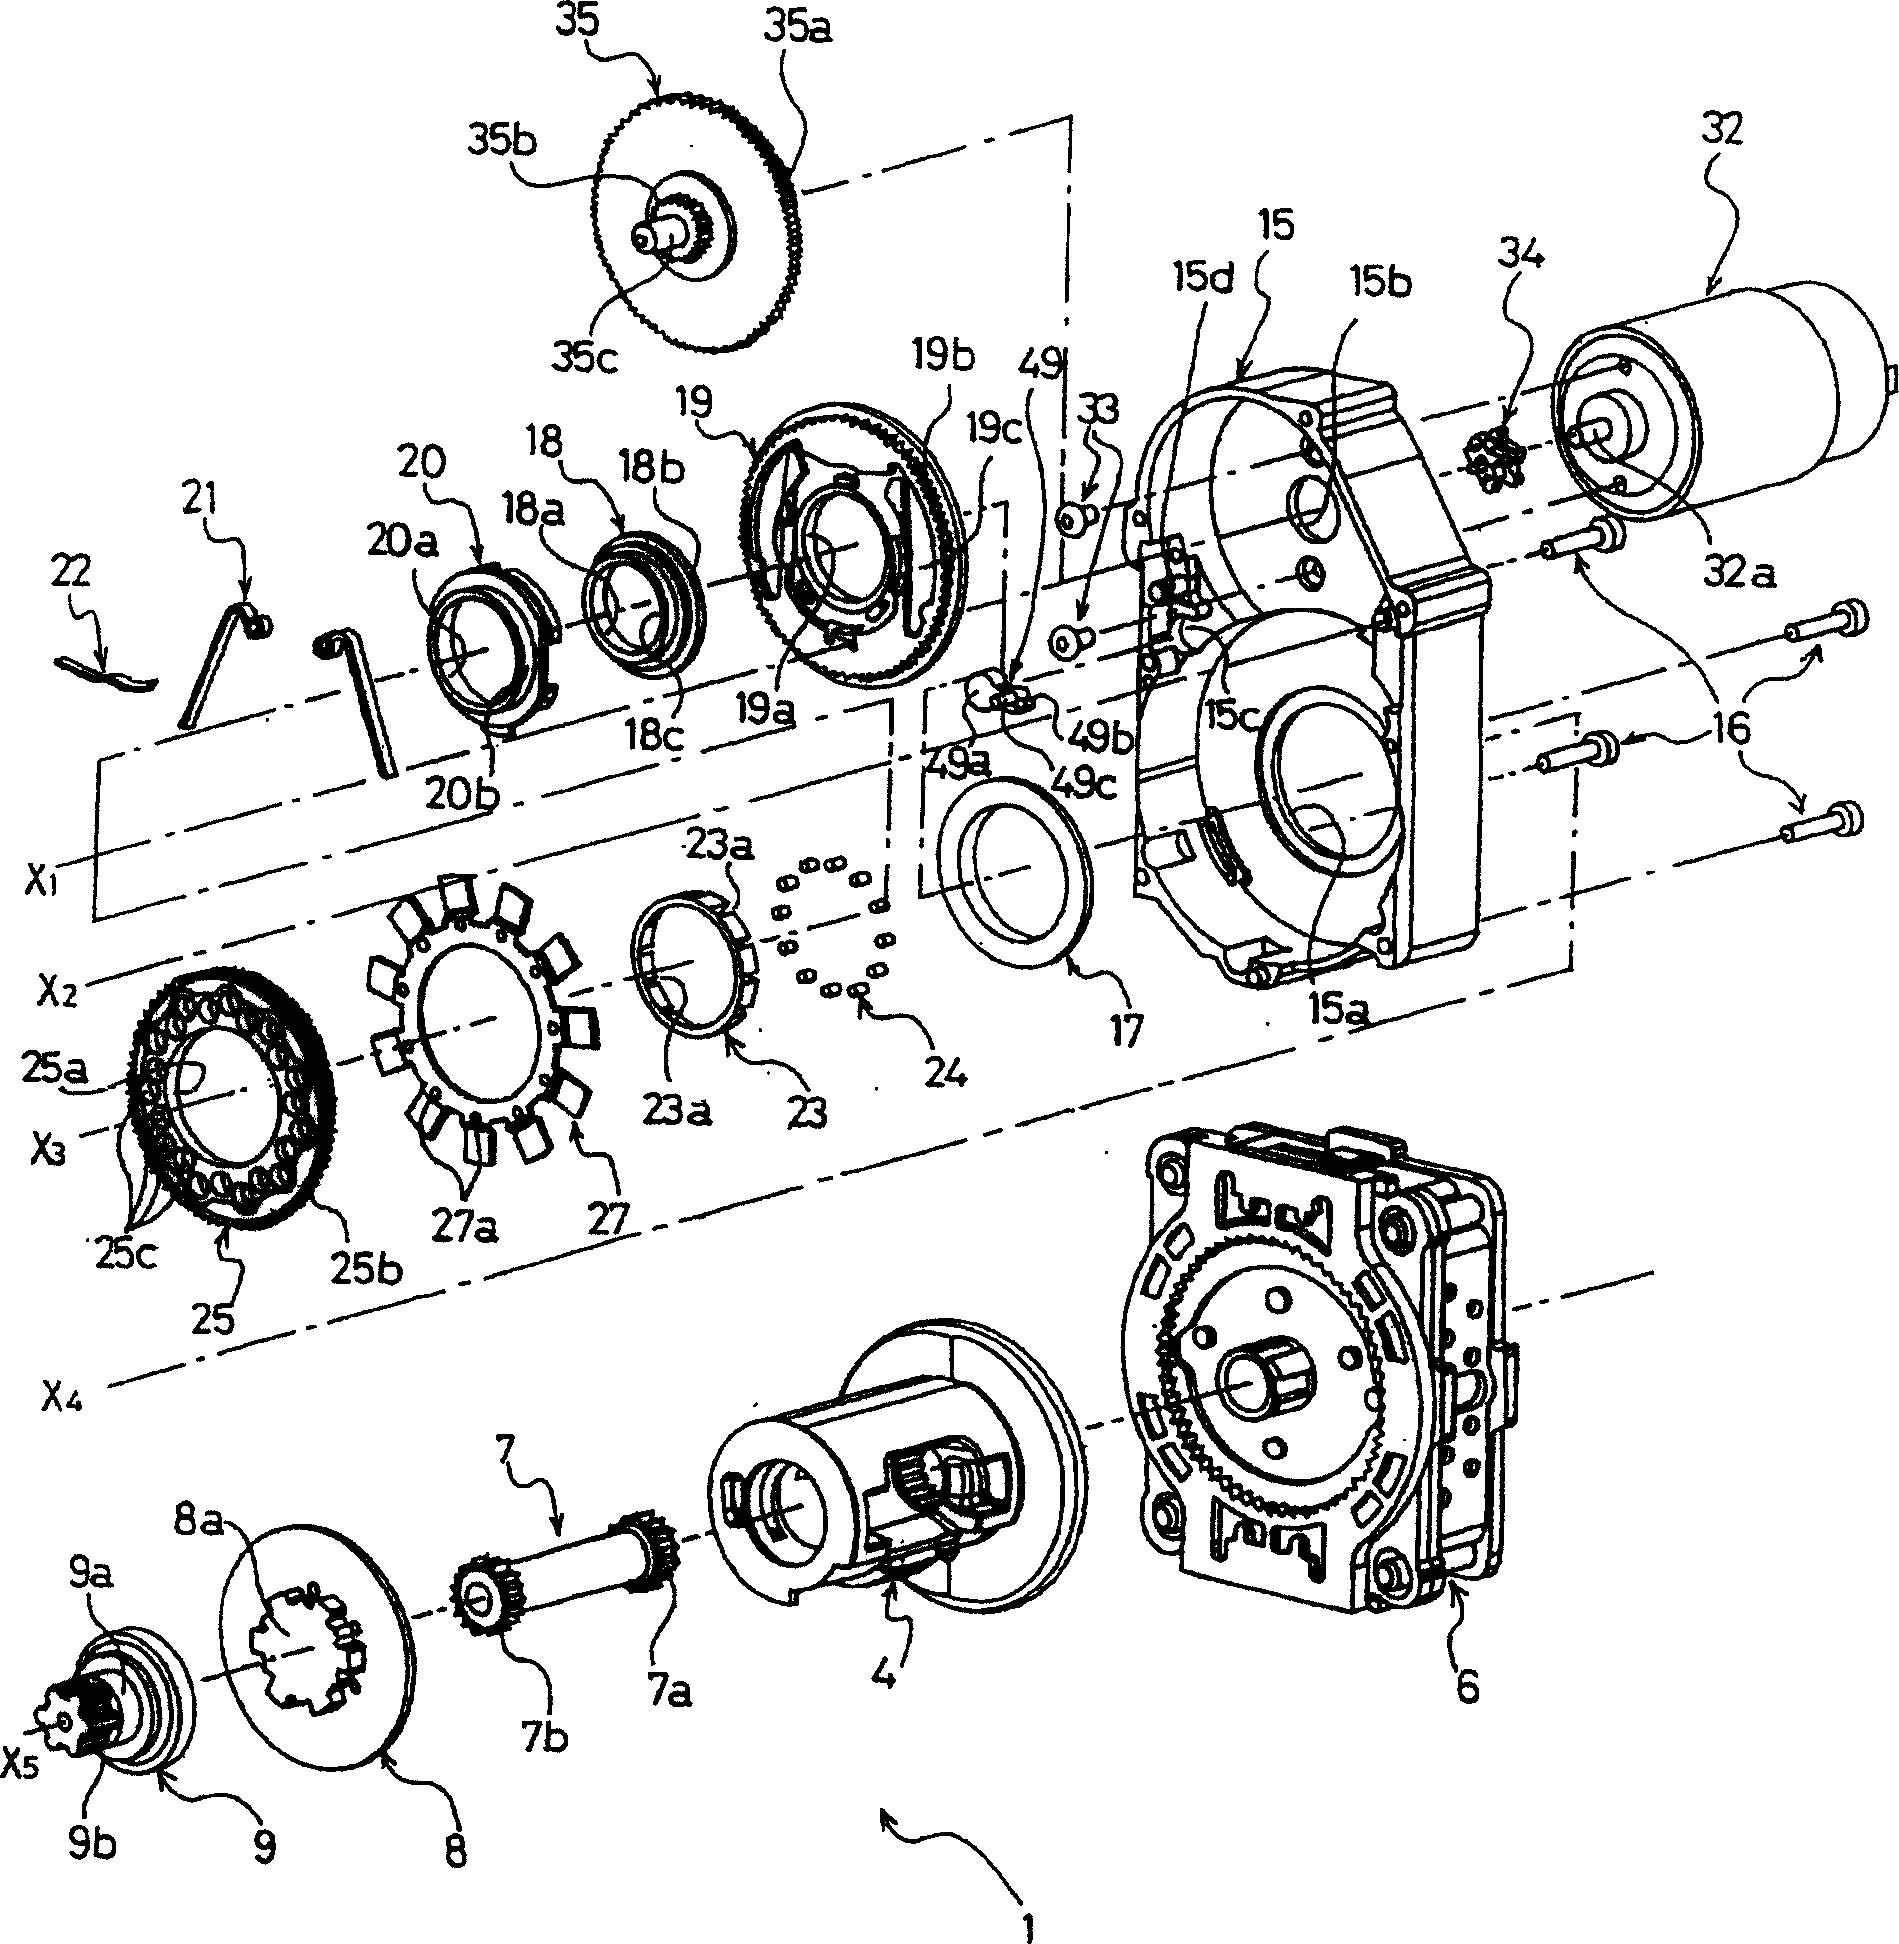 Seat belt retractor and seat belt device using the same